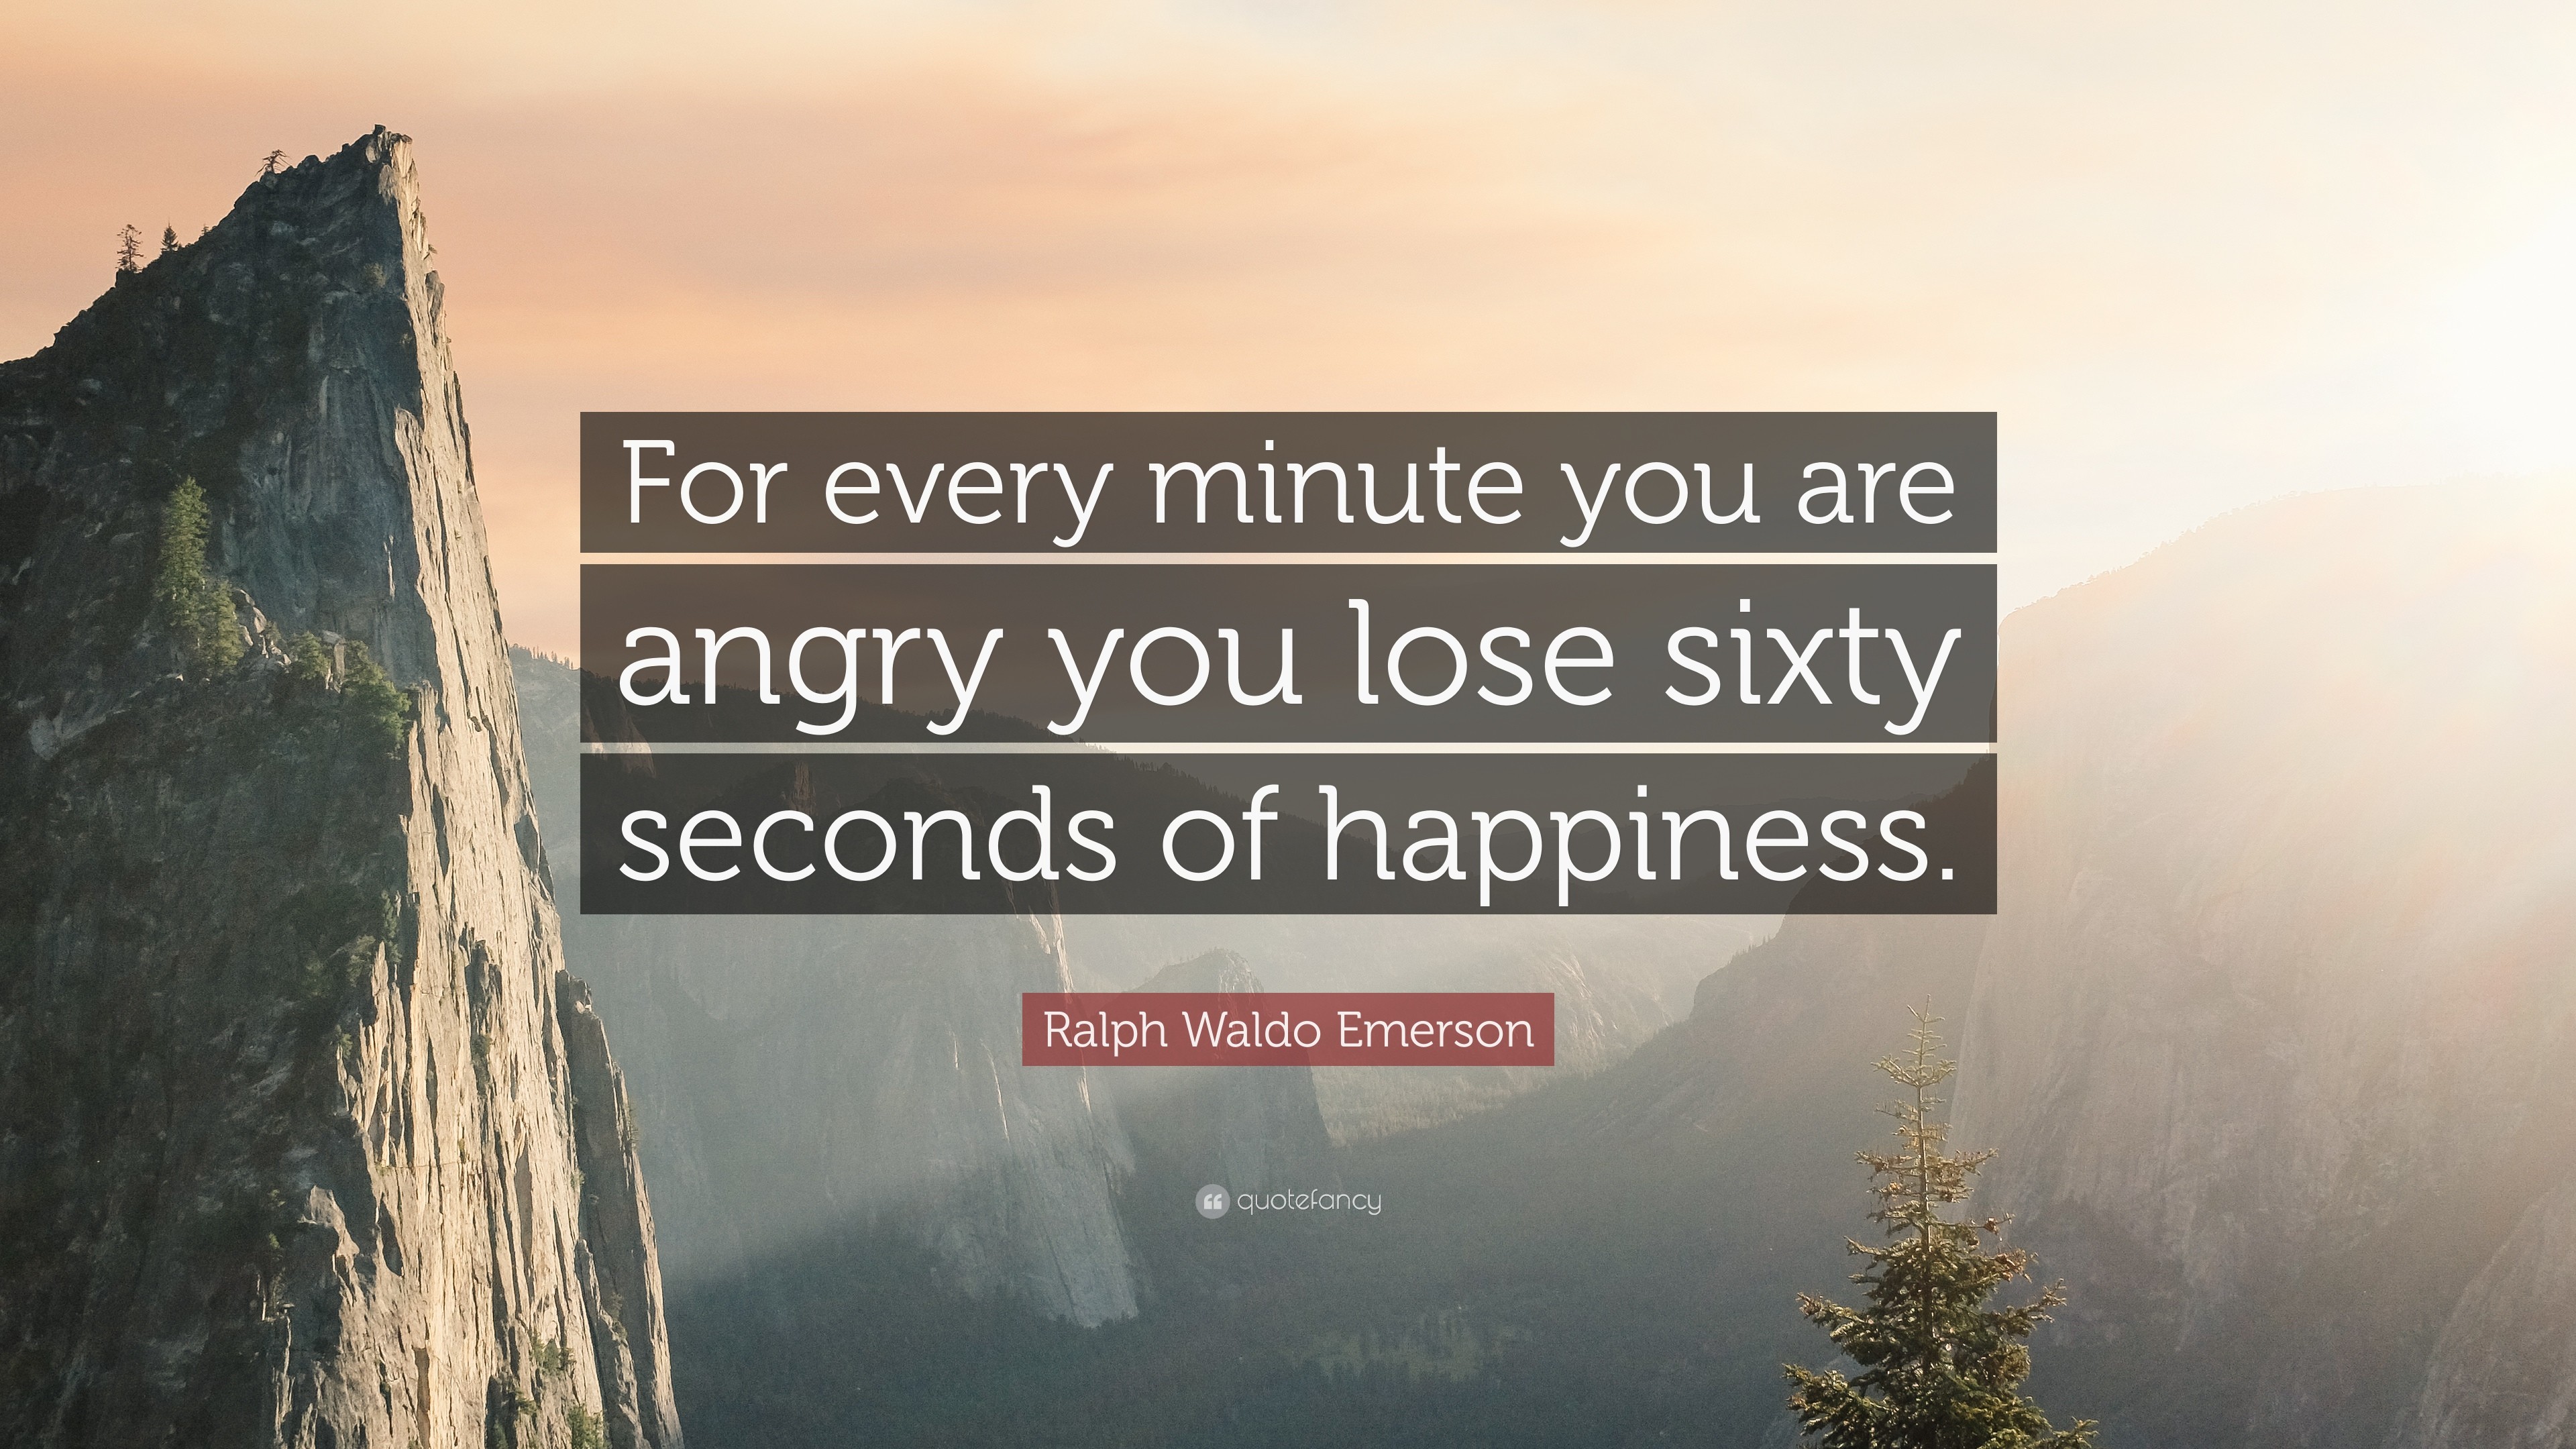 3840x2160 ... Wallpaper Of Love Caring Even In Anger 5 Desktop Happiness Quotes  Quotefancy On Wallpaper Of Love ...